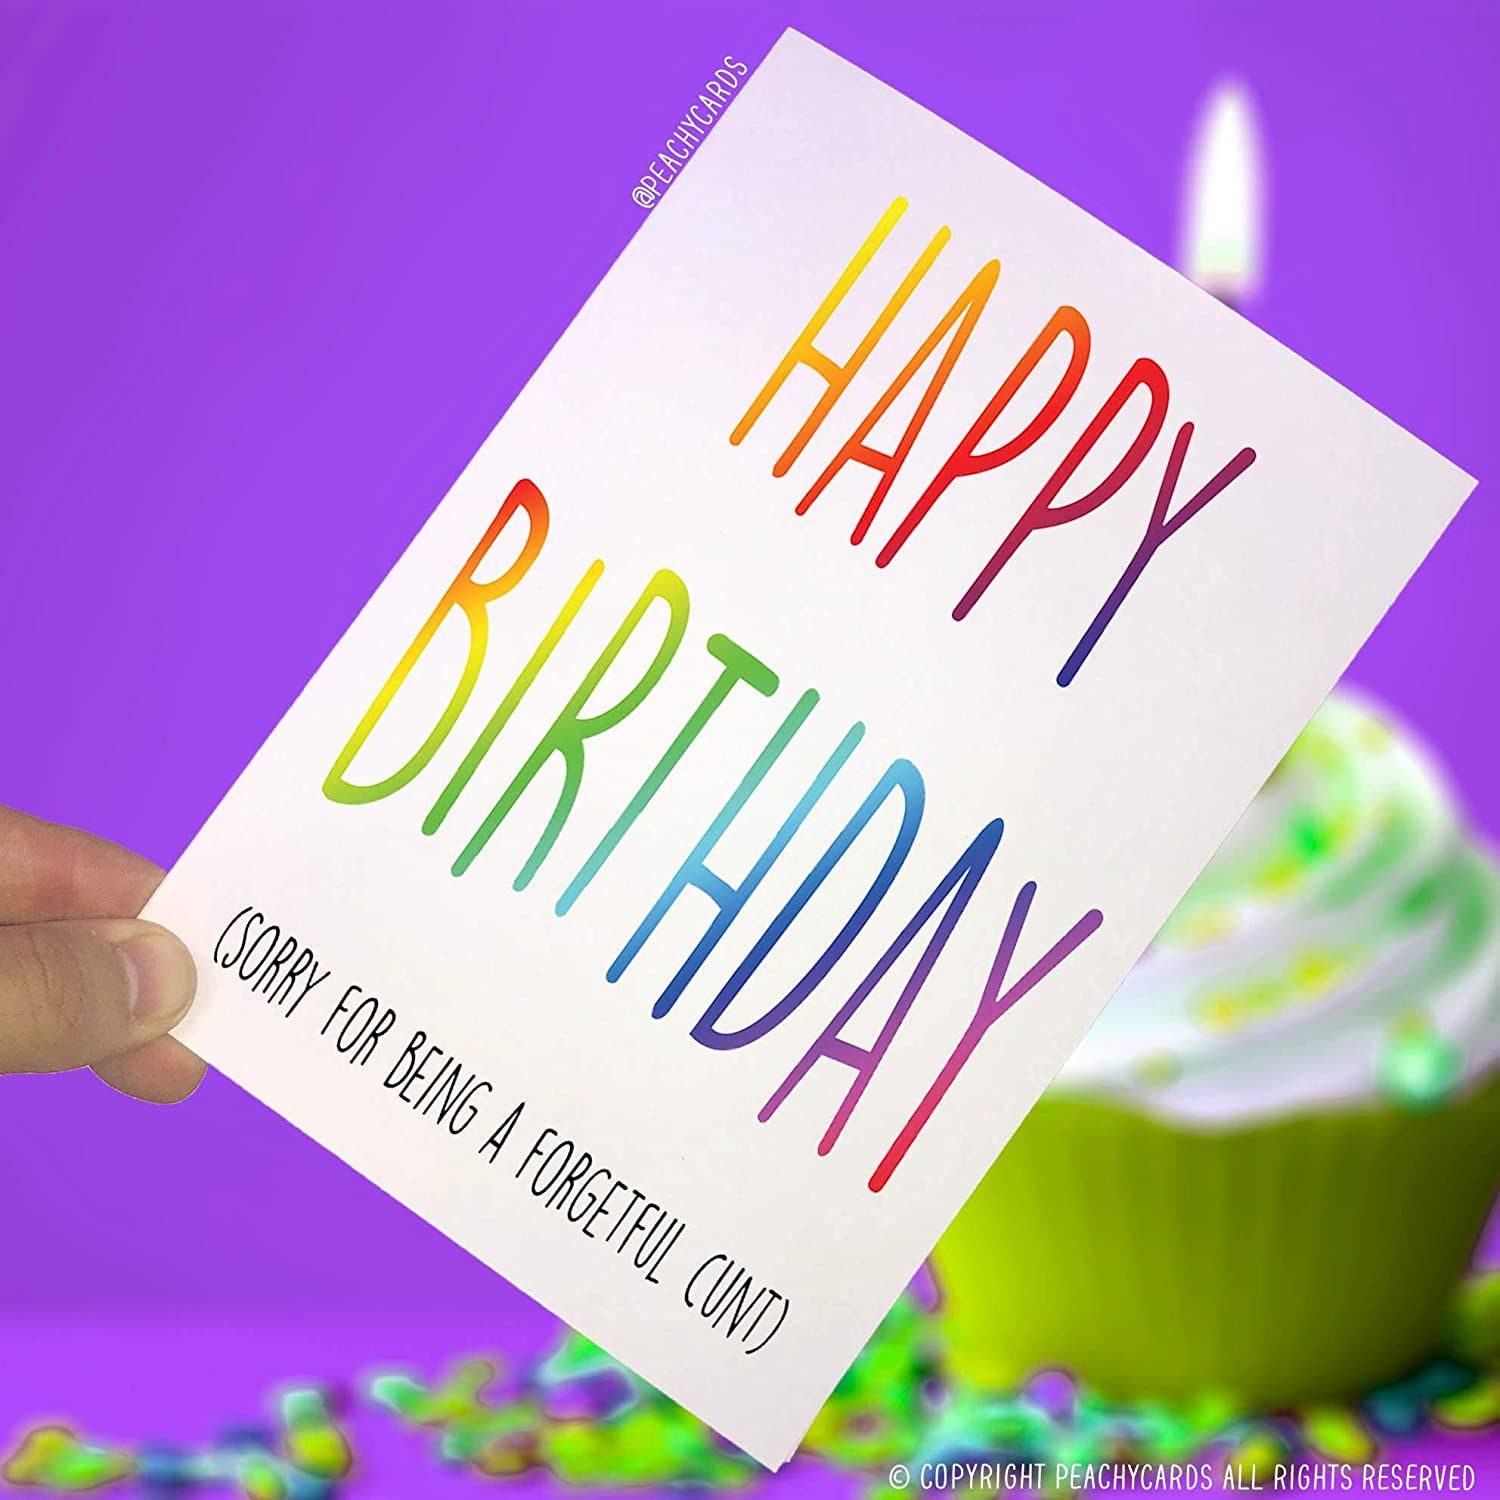 Peachy Antics ''Happy Birthday (Sorry For Being A Forgetful Cunt)'' Card RRP £2.21 CLEARANCE XL 99p